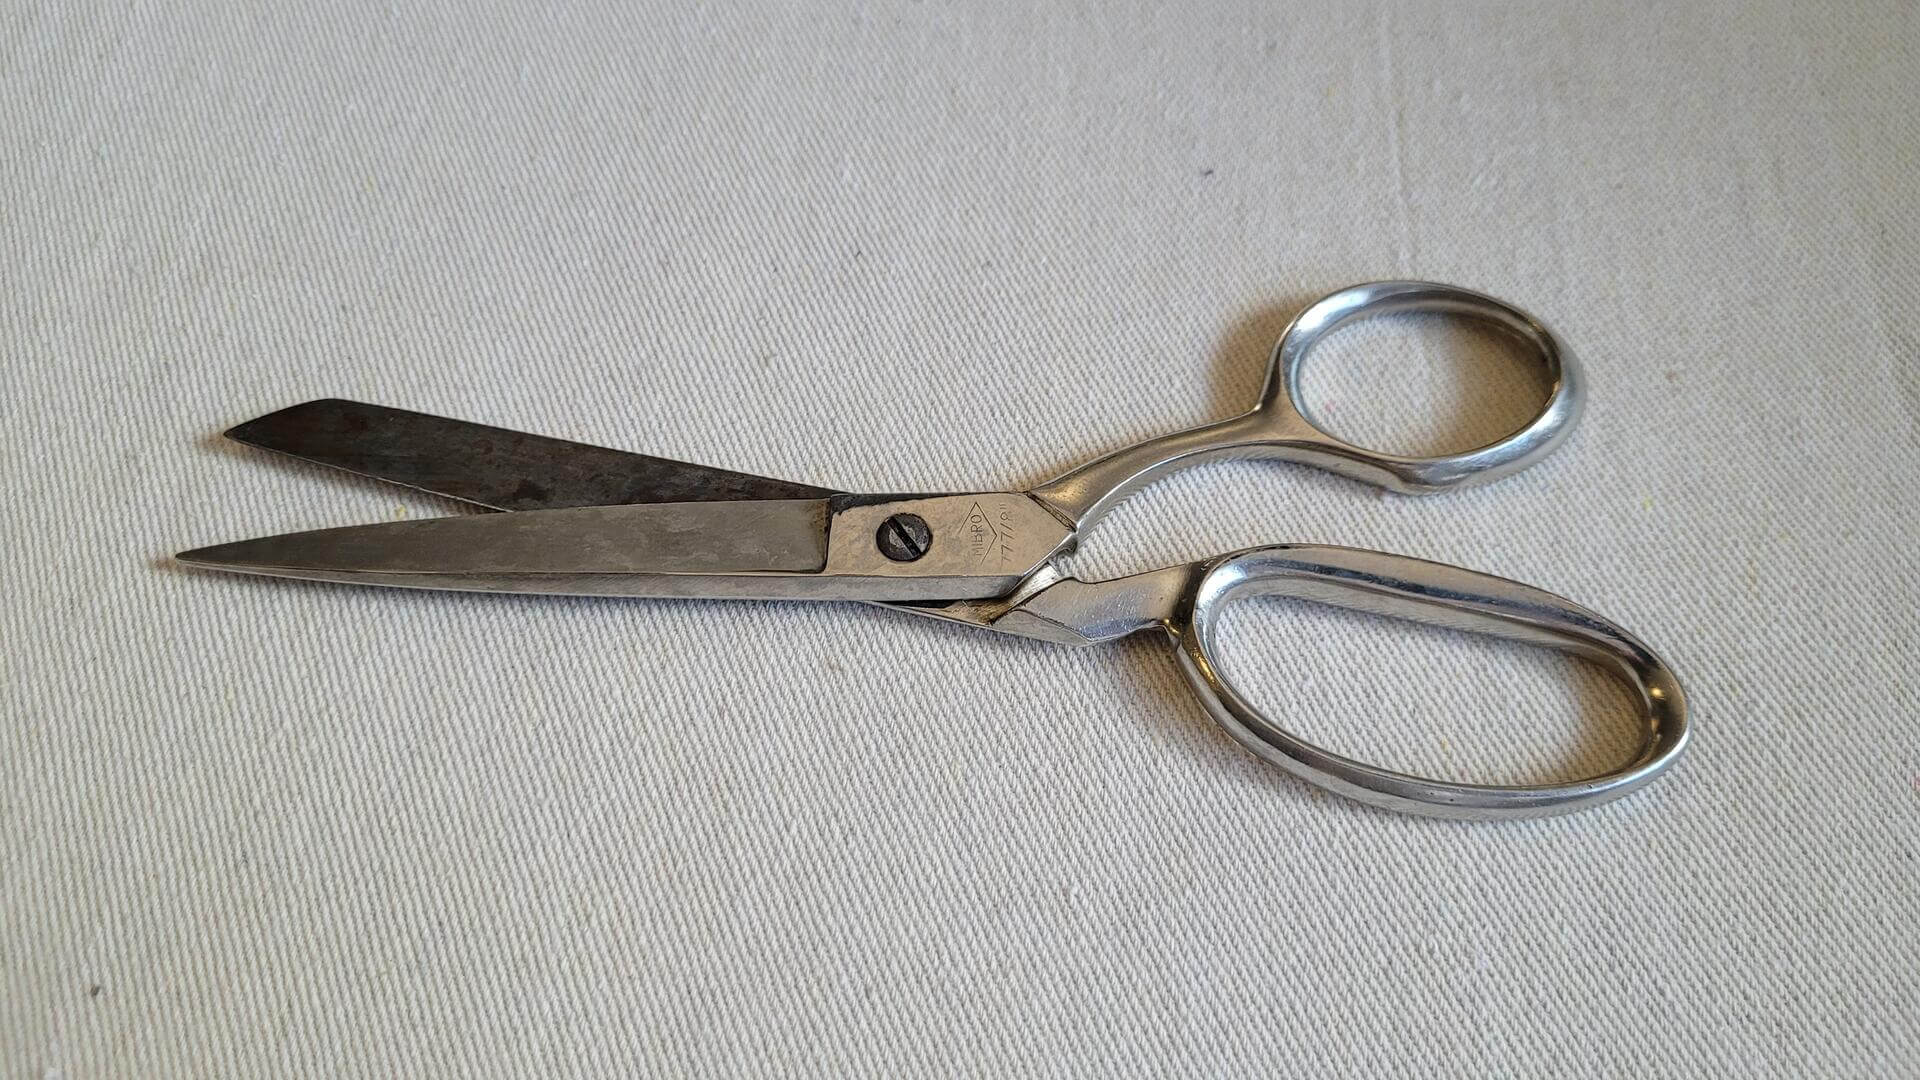 Rare pair of Mibro sewing scissors shears 8 inches long. Vintage made in Germany upholstery and seamstress fabric cutting tools